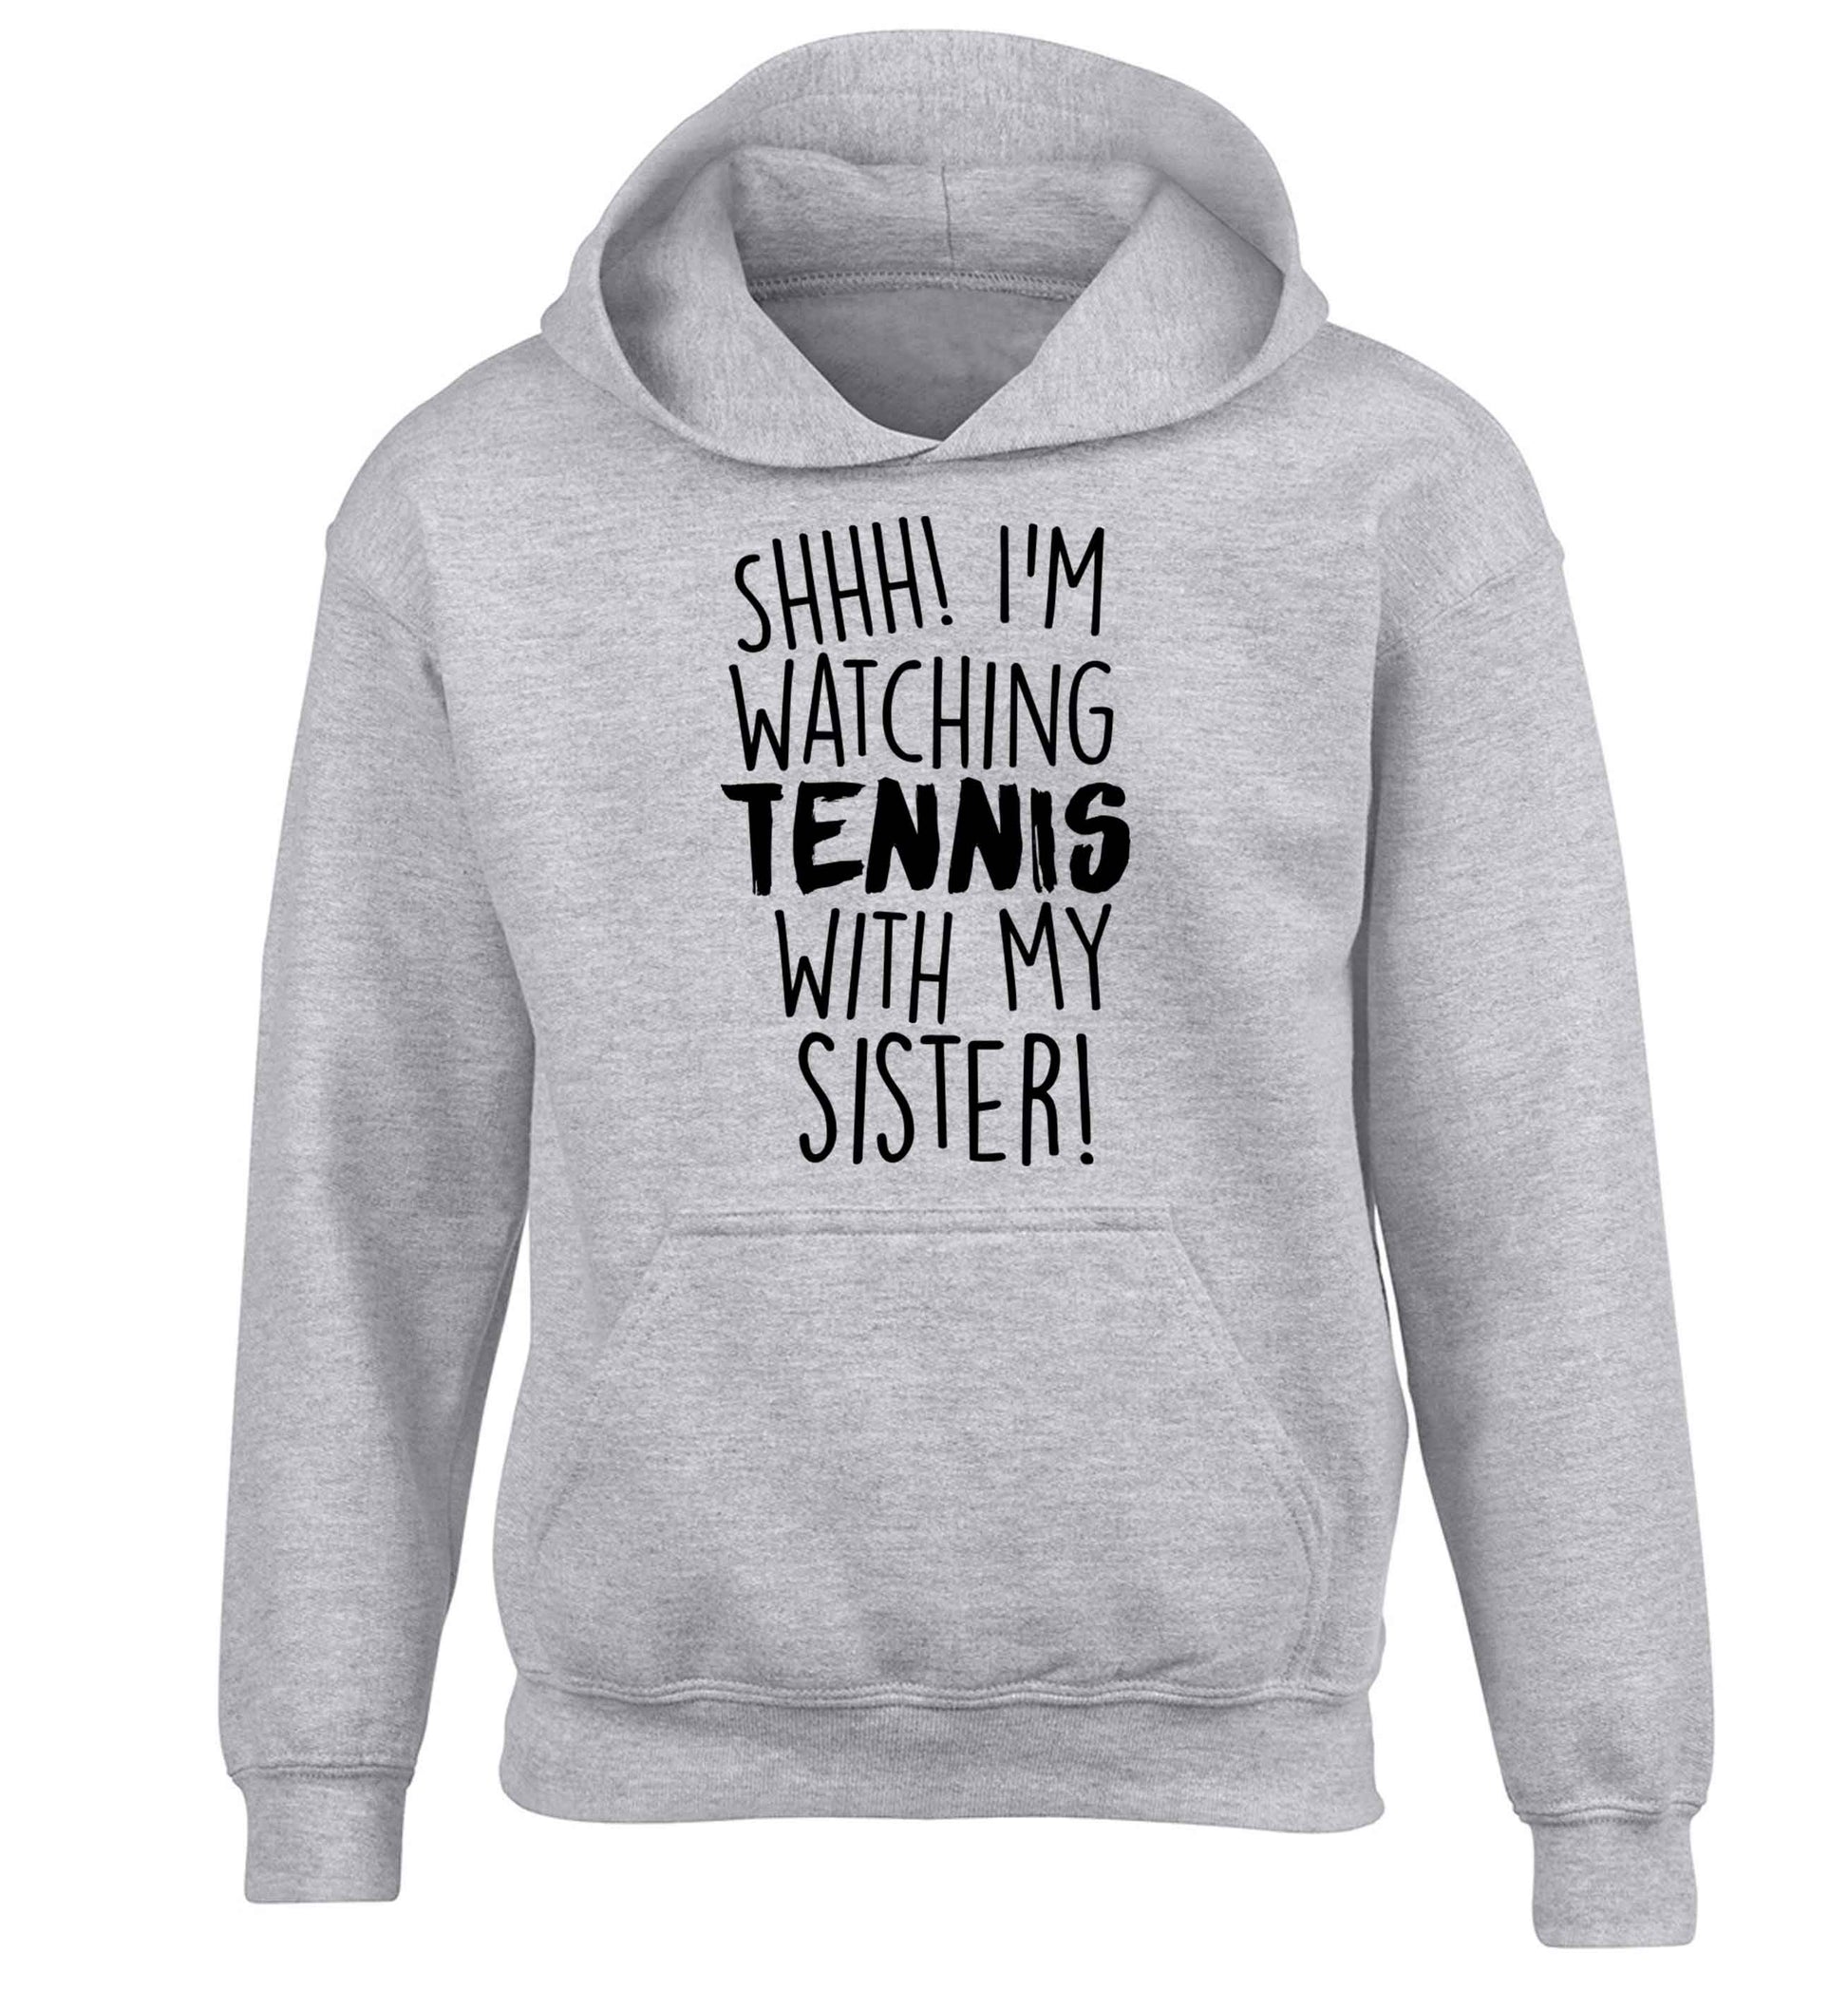 Shh! I'm watching tennis with my sister! children's grey hoodie 12-13 Years